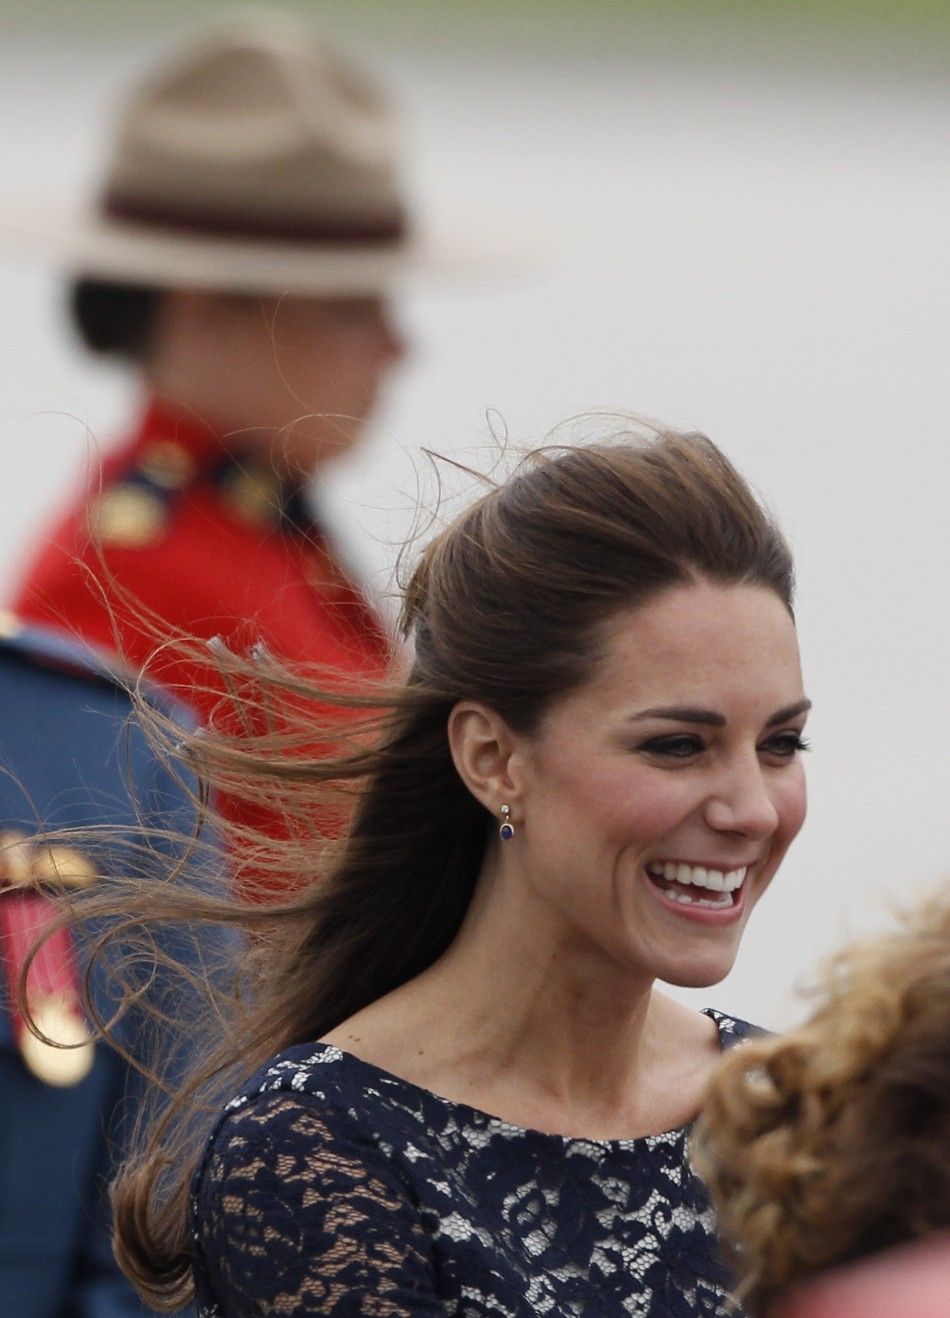 Kate Middleton makes diplomatic fashion choice during official Canada tour.